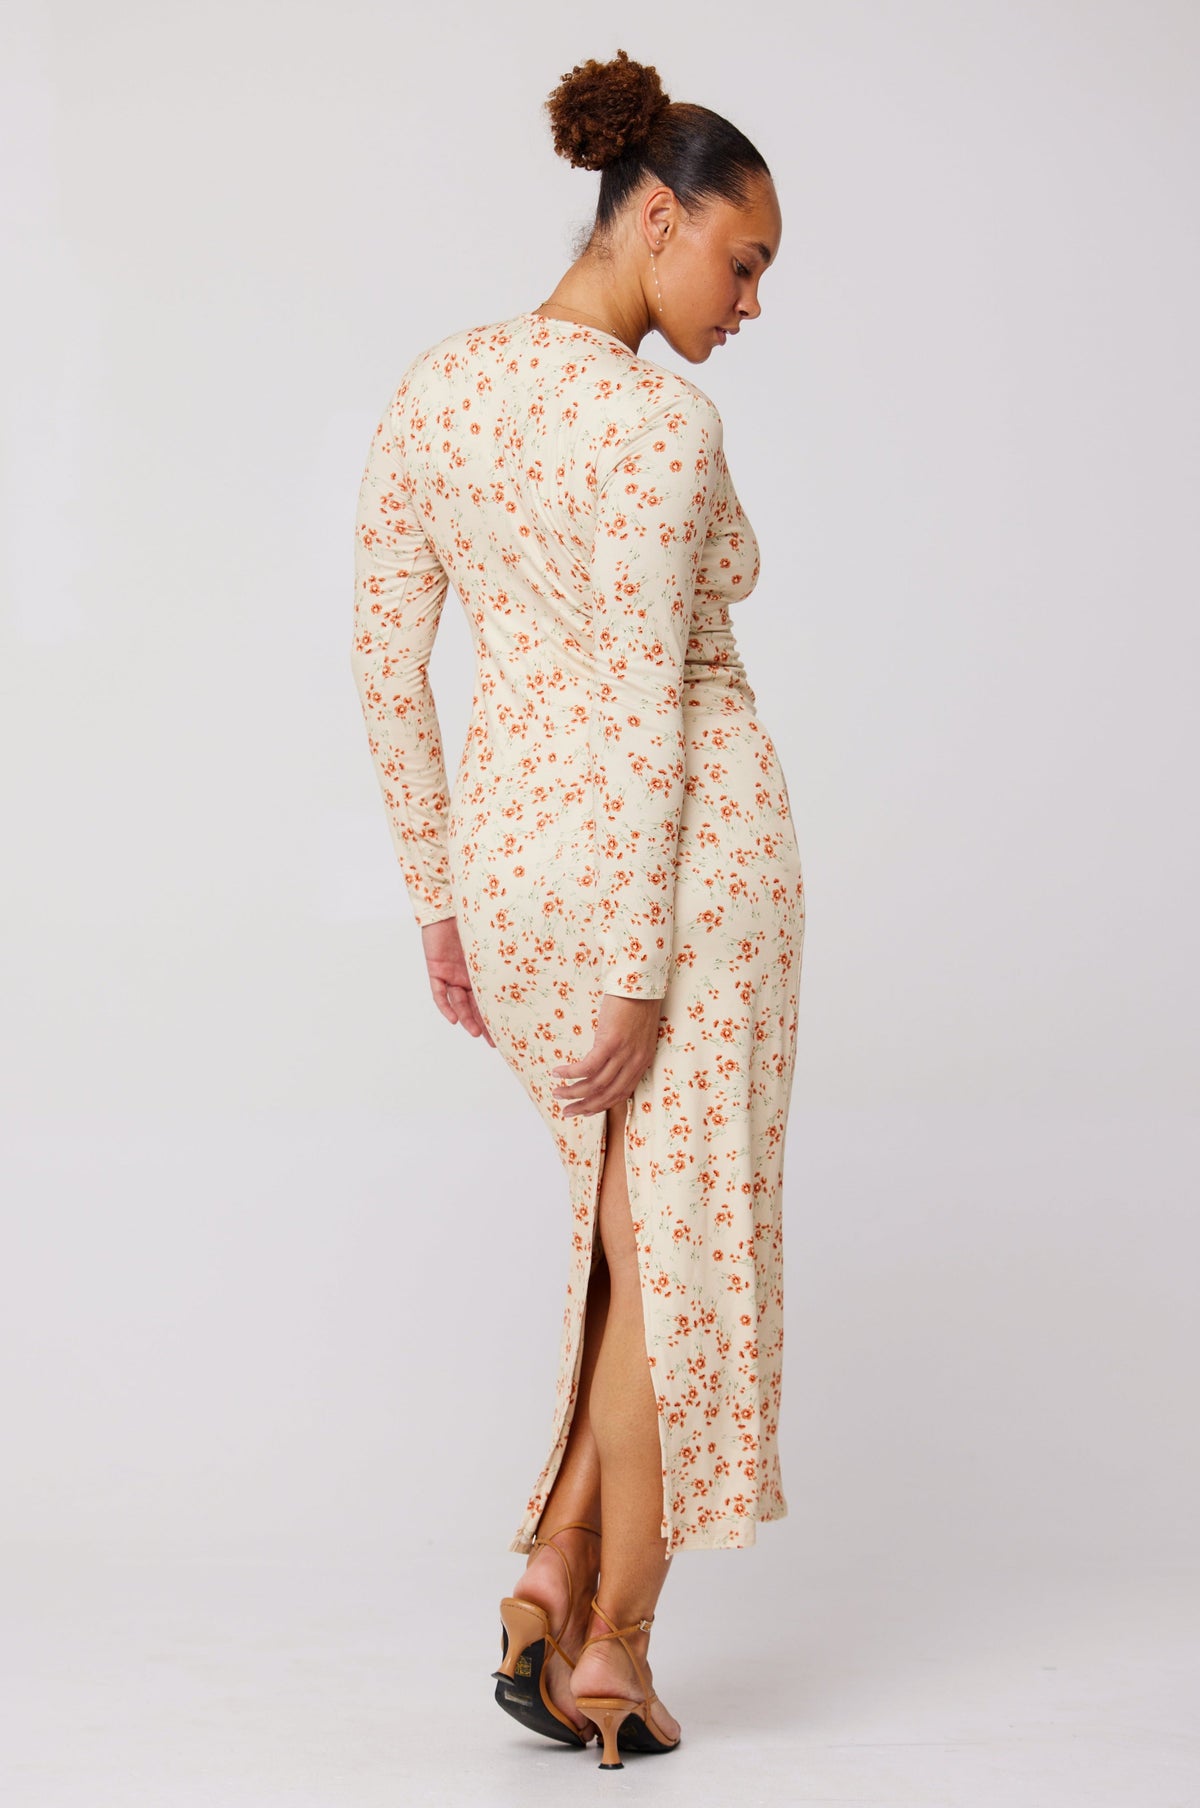 This is an image of Twiggy Dress in Wildflower - RESA featuring a model wearing the dress